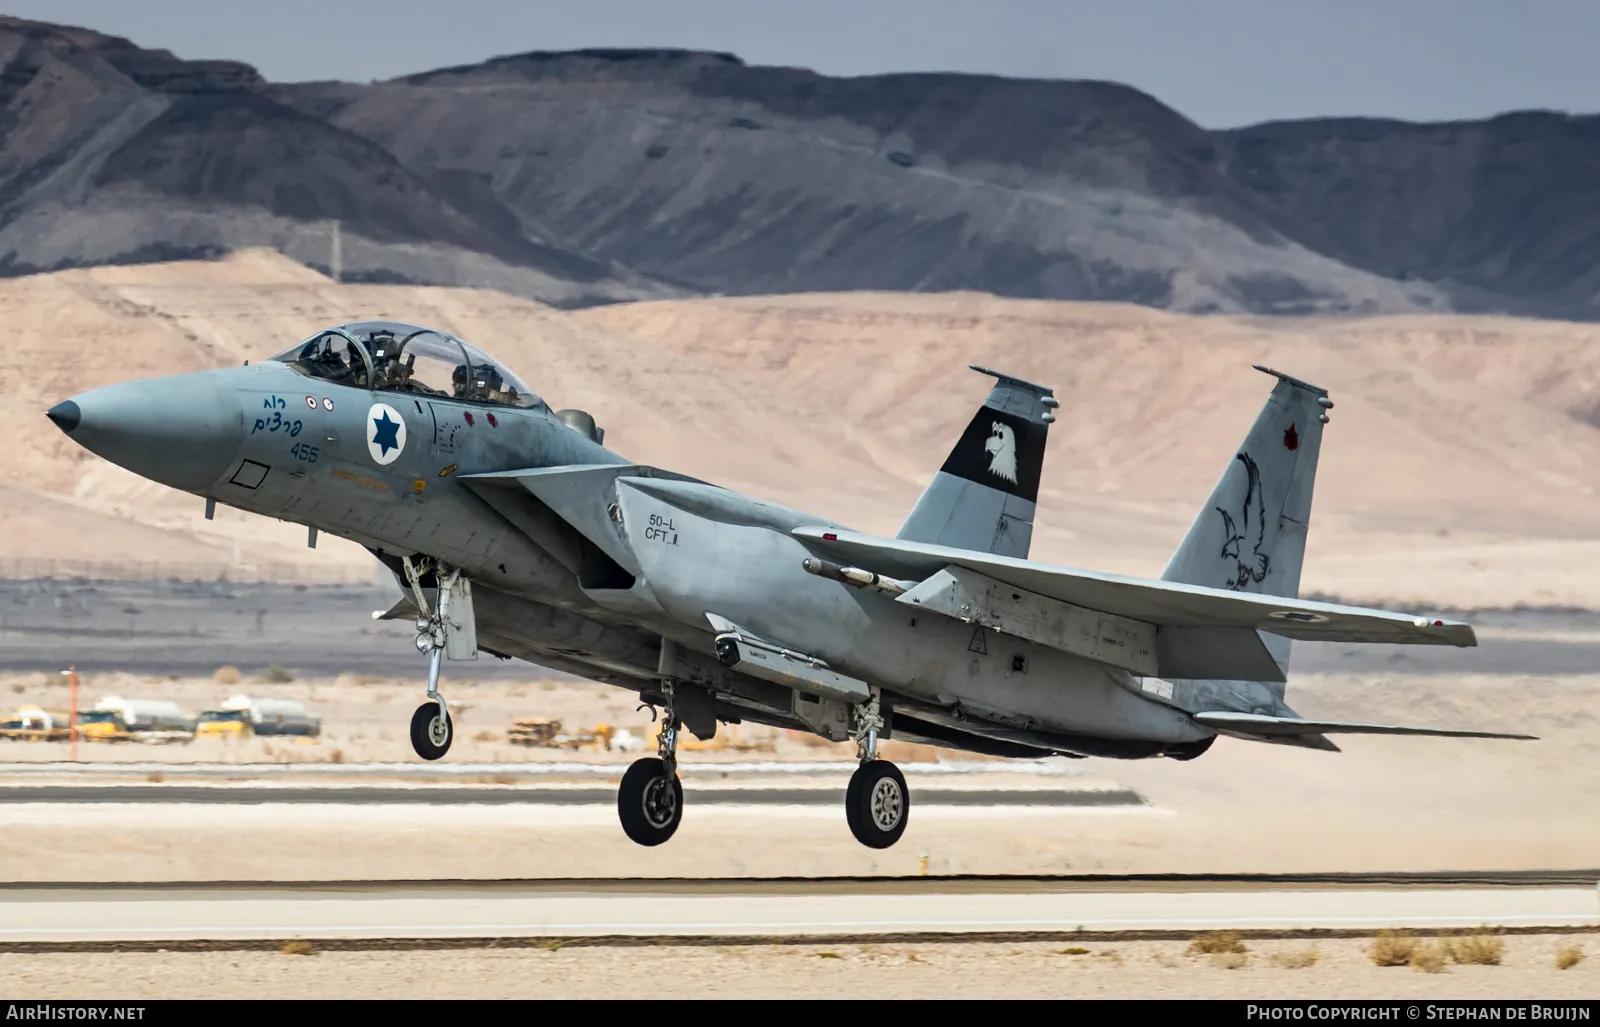 Atlas of Israeli Air Force F-15 Series Fighters (166 pictures) - iNEWS